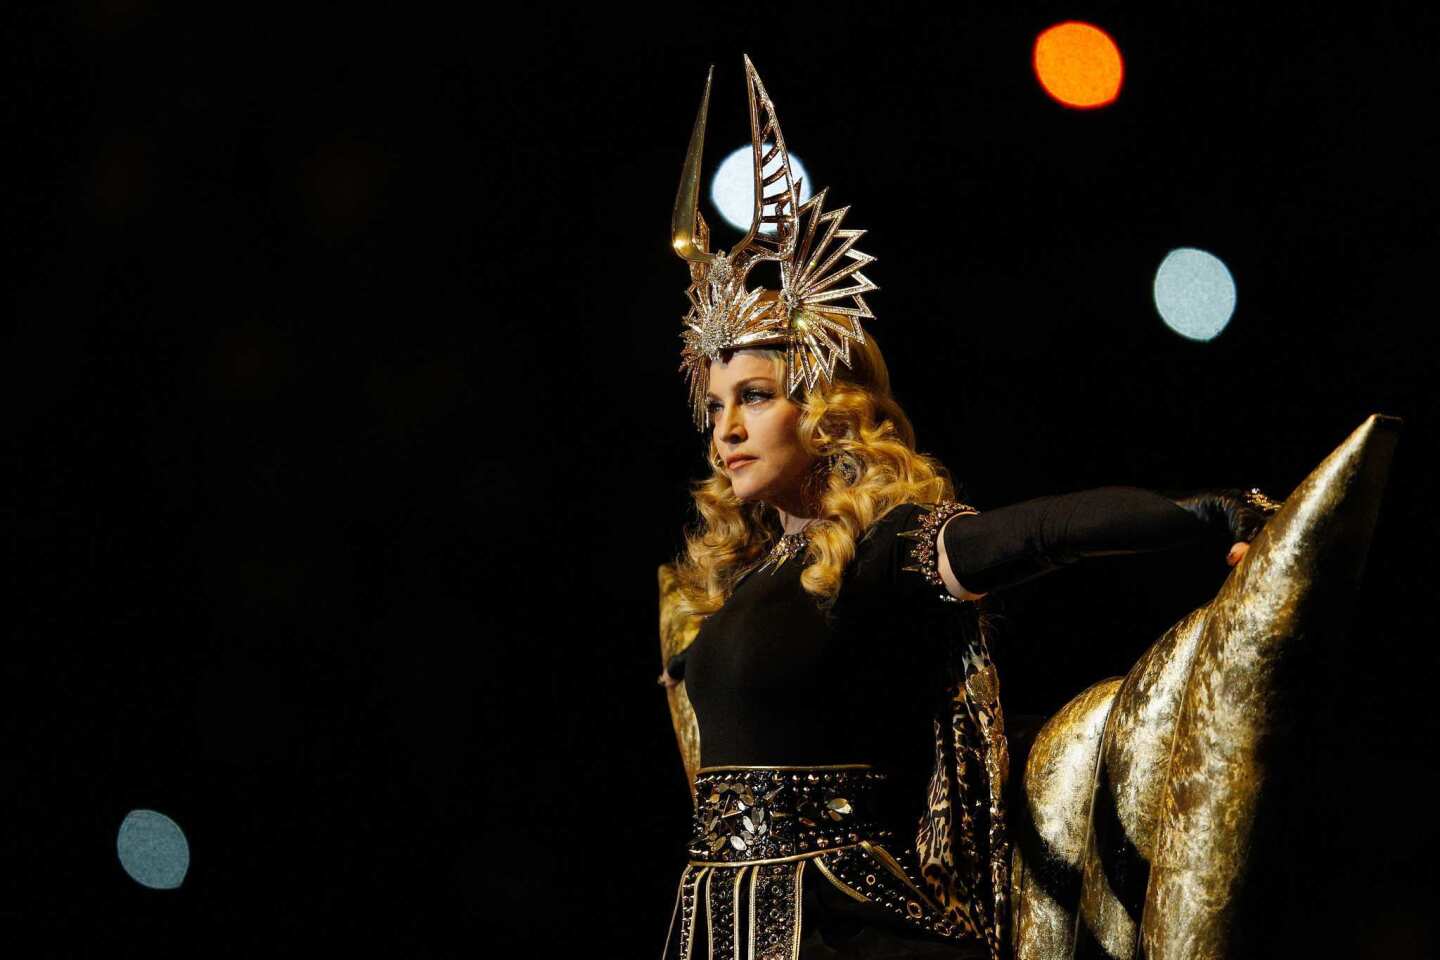 Madonna performs during the Super Bowl XLVI halftime show in Indianapolis.